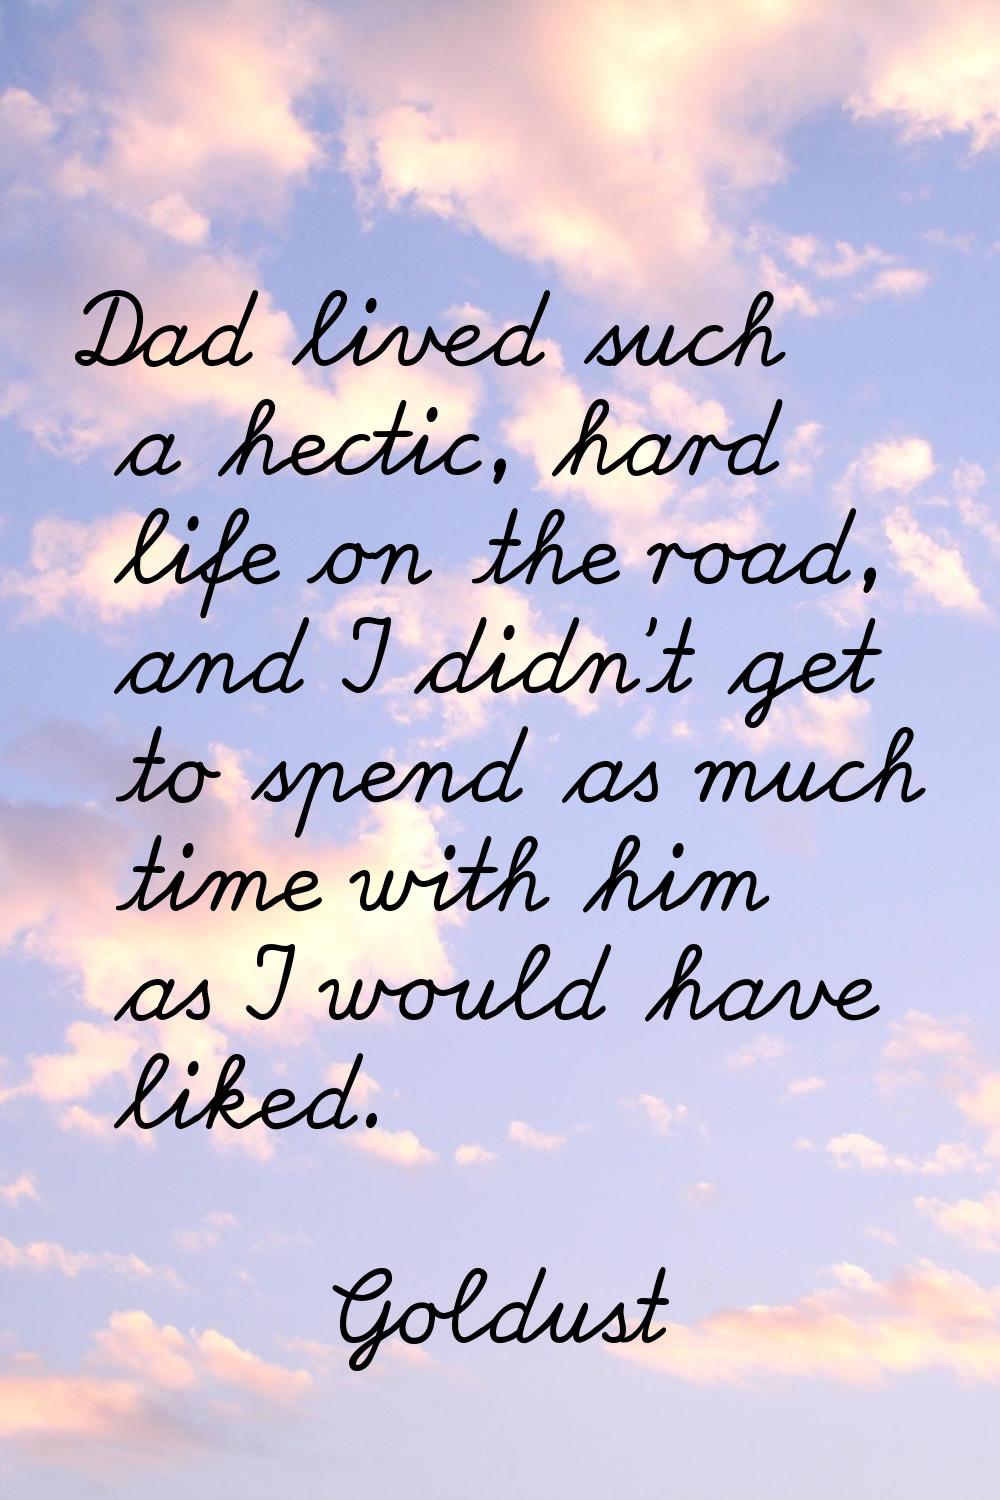 Dad lived such a hectic, hard life on the road, and I didn't get to spend as much time with him as 